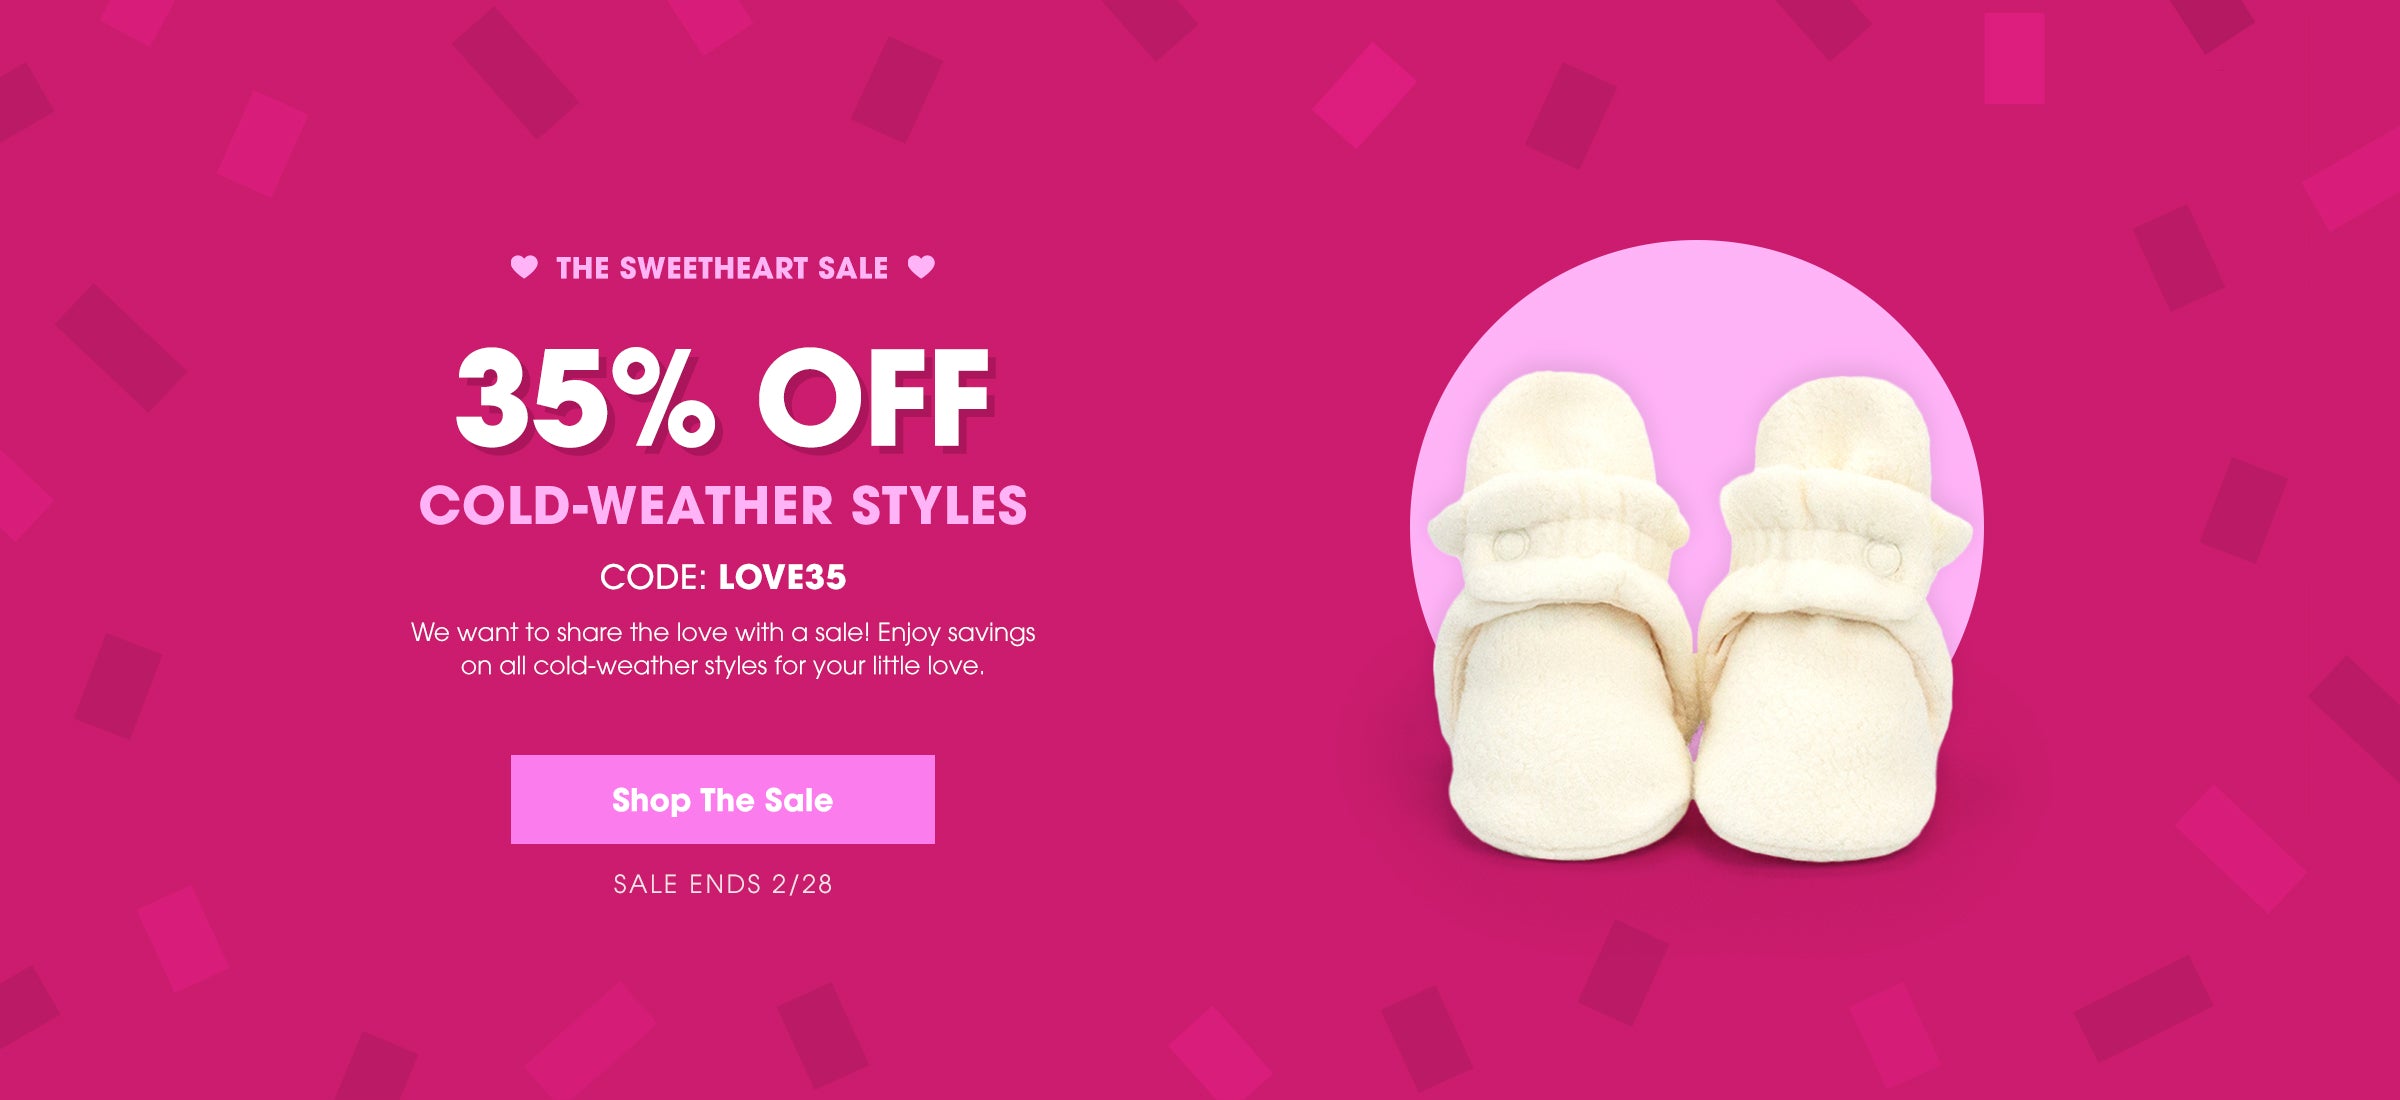 35% off cold weather styles